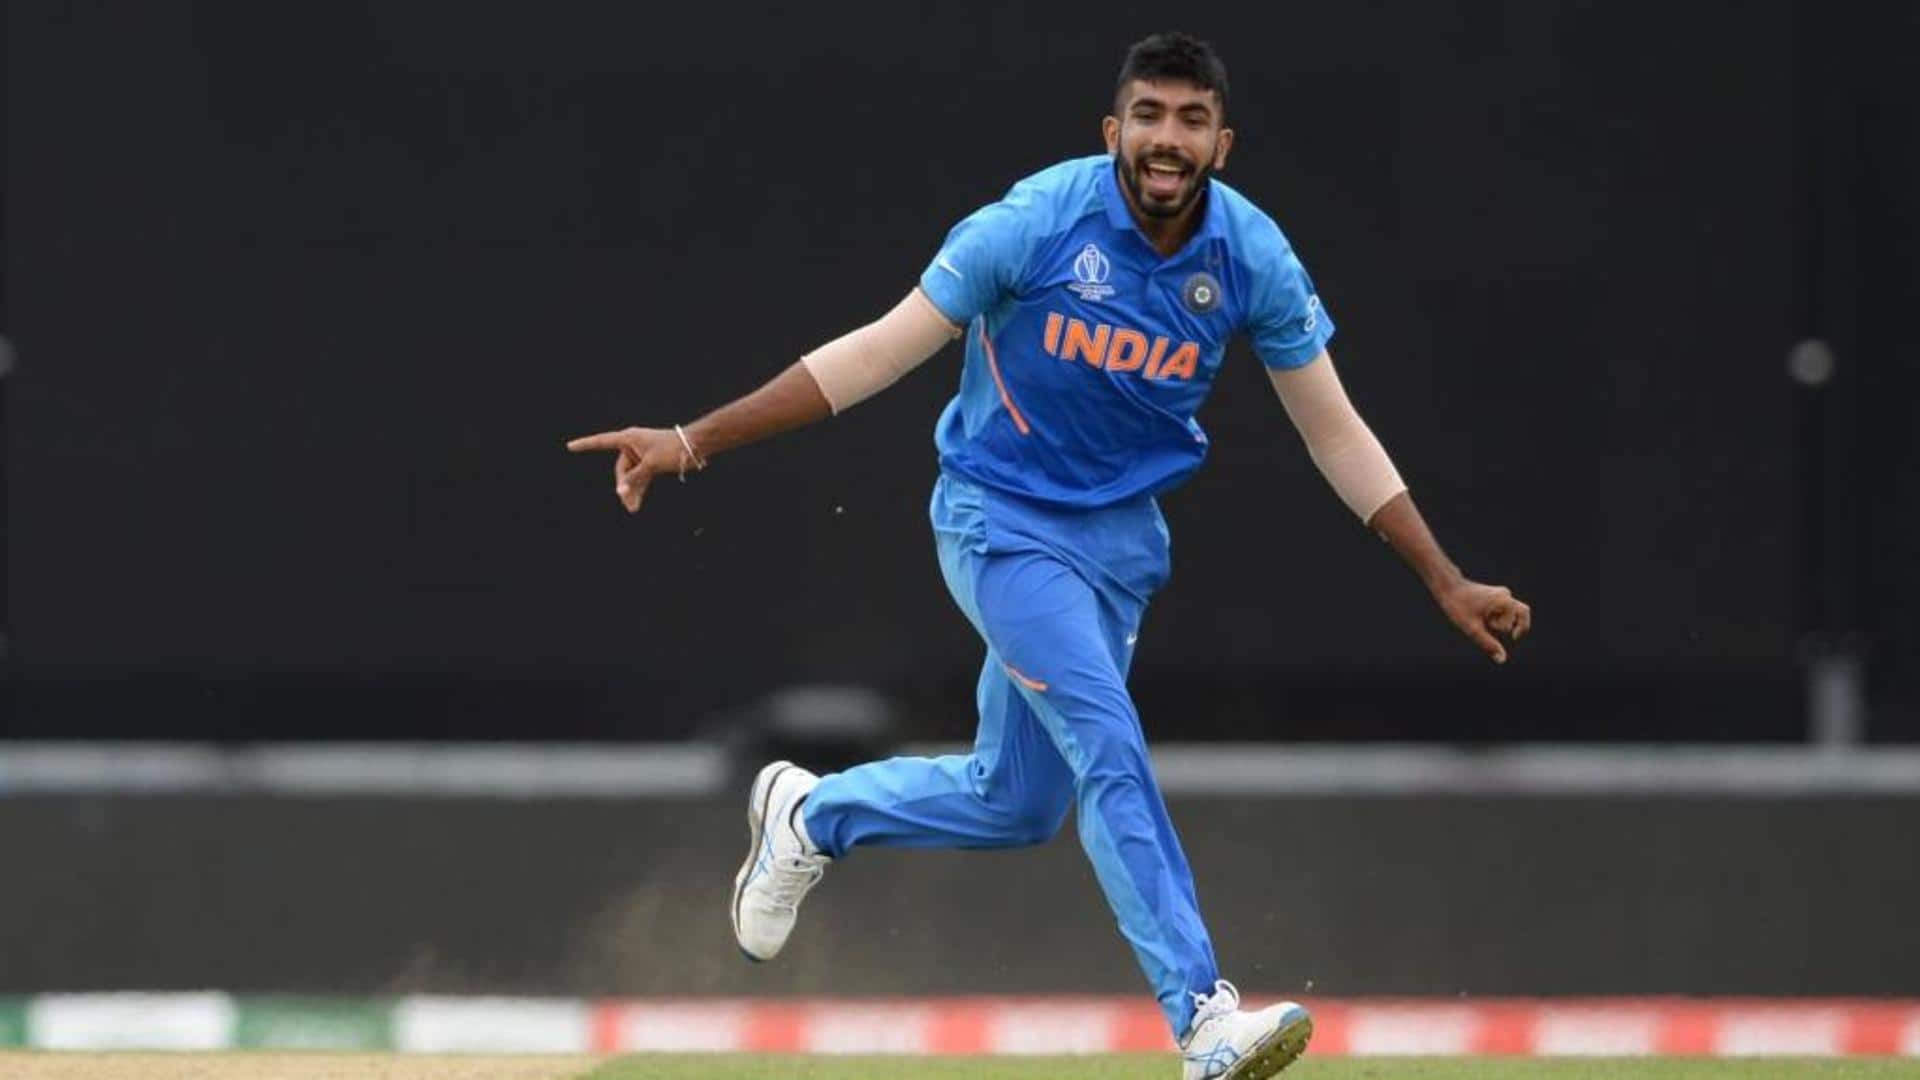 Five stats that define Jasprit Bumrah's prowess in T20 cricket